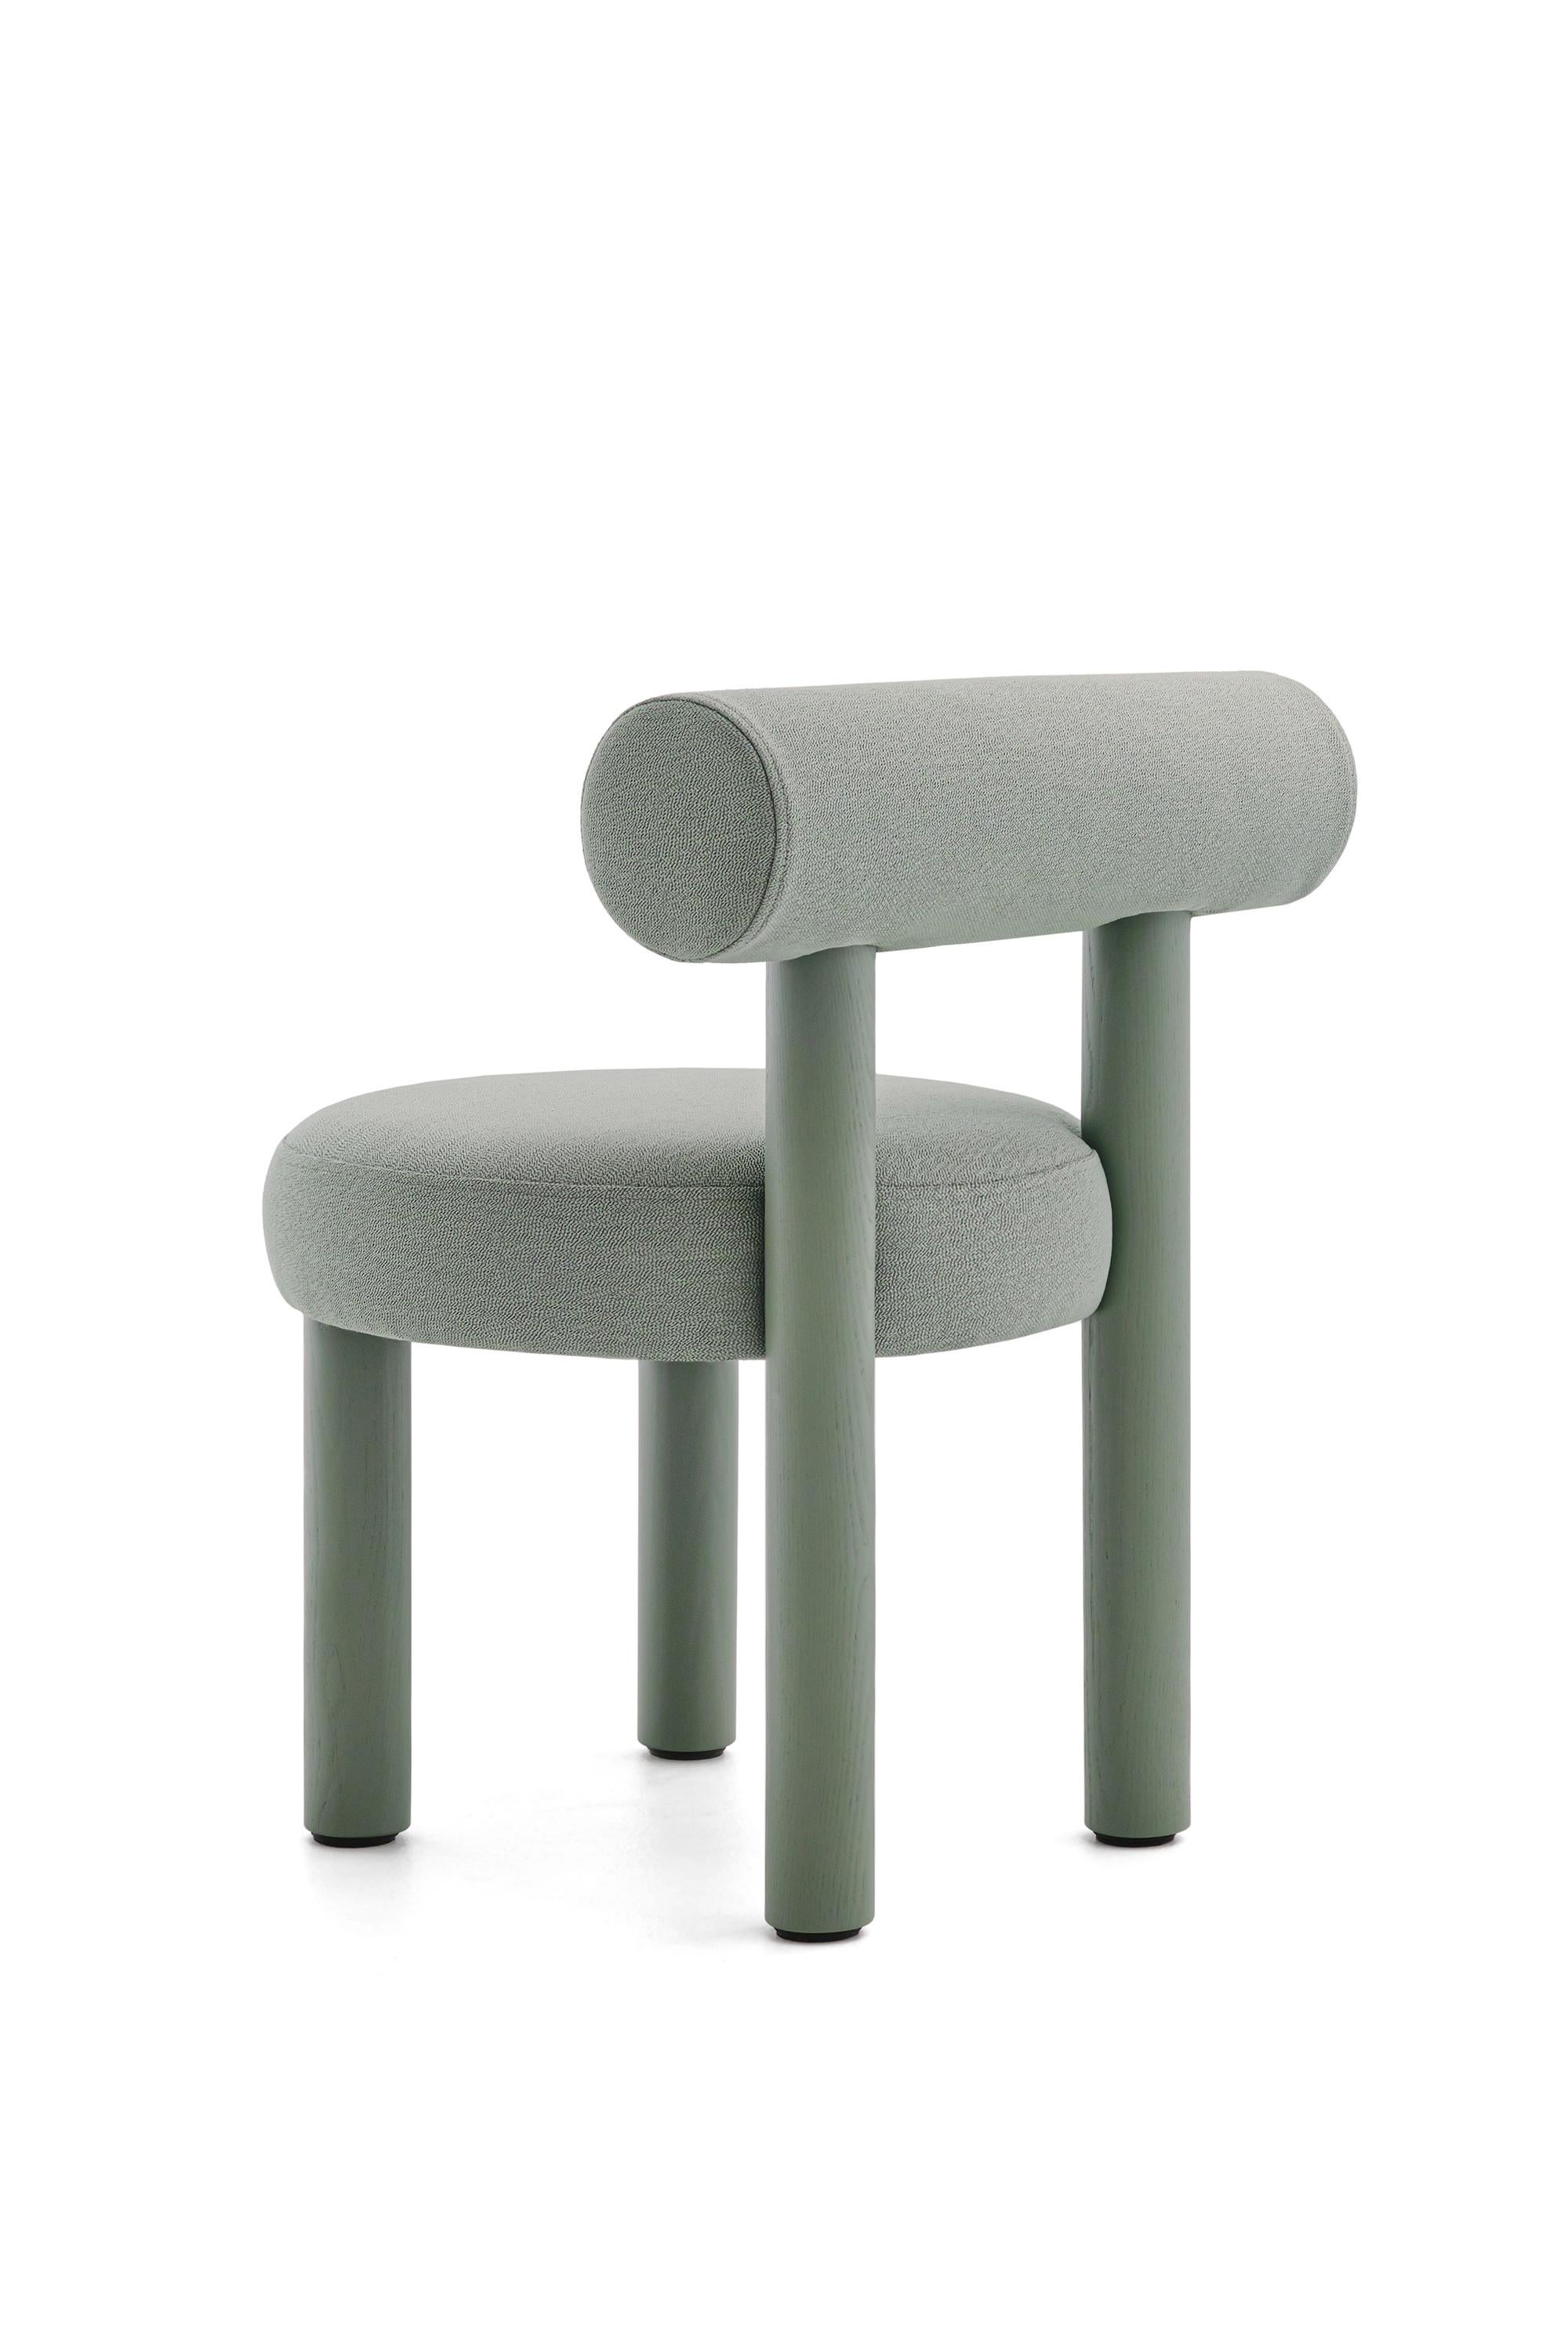 Modern Dining Chair Gropius CS2 in Wool Fabric with Wooden Legs by Noom 7